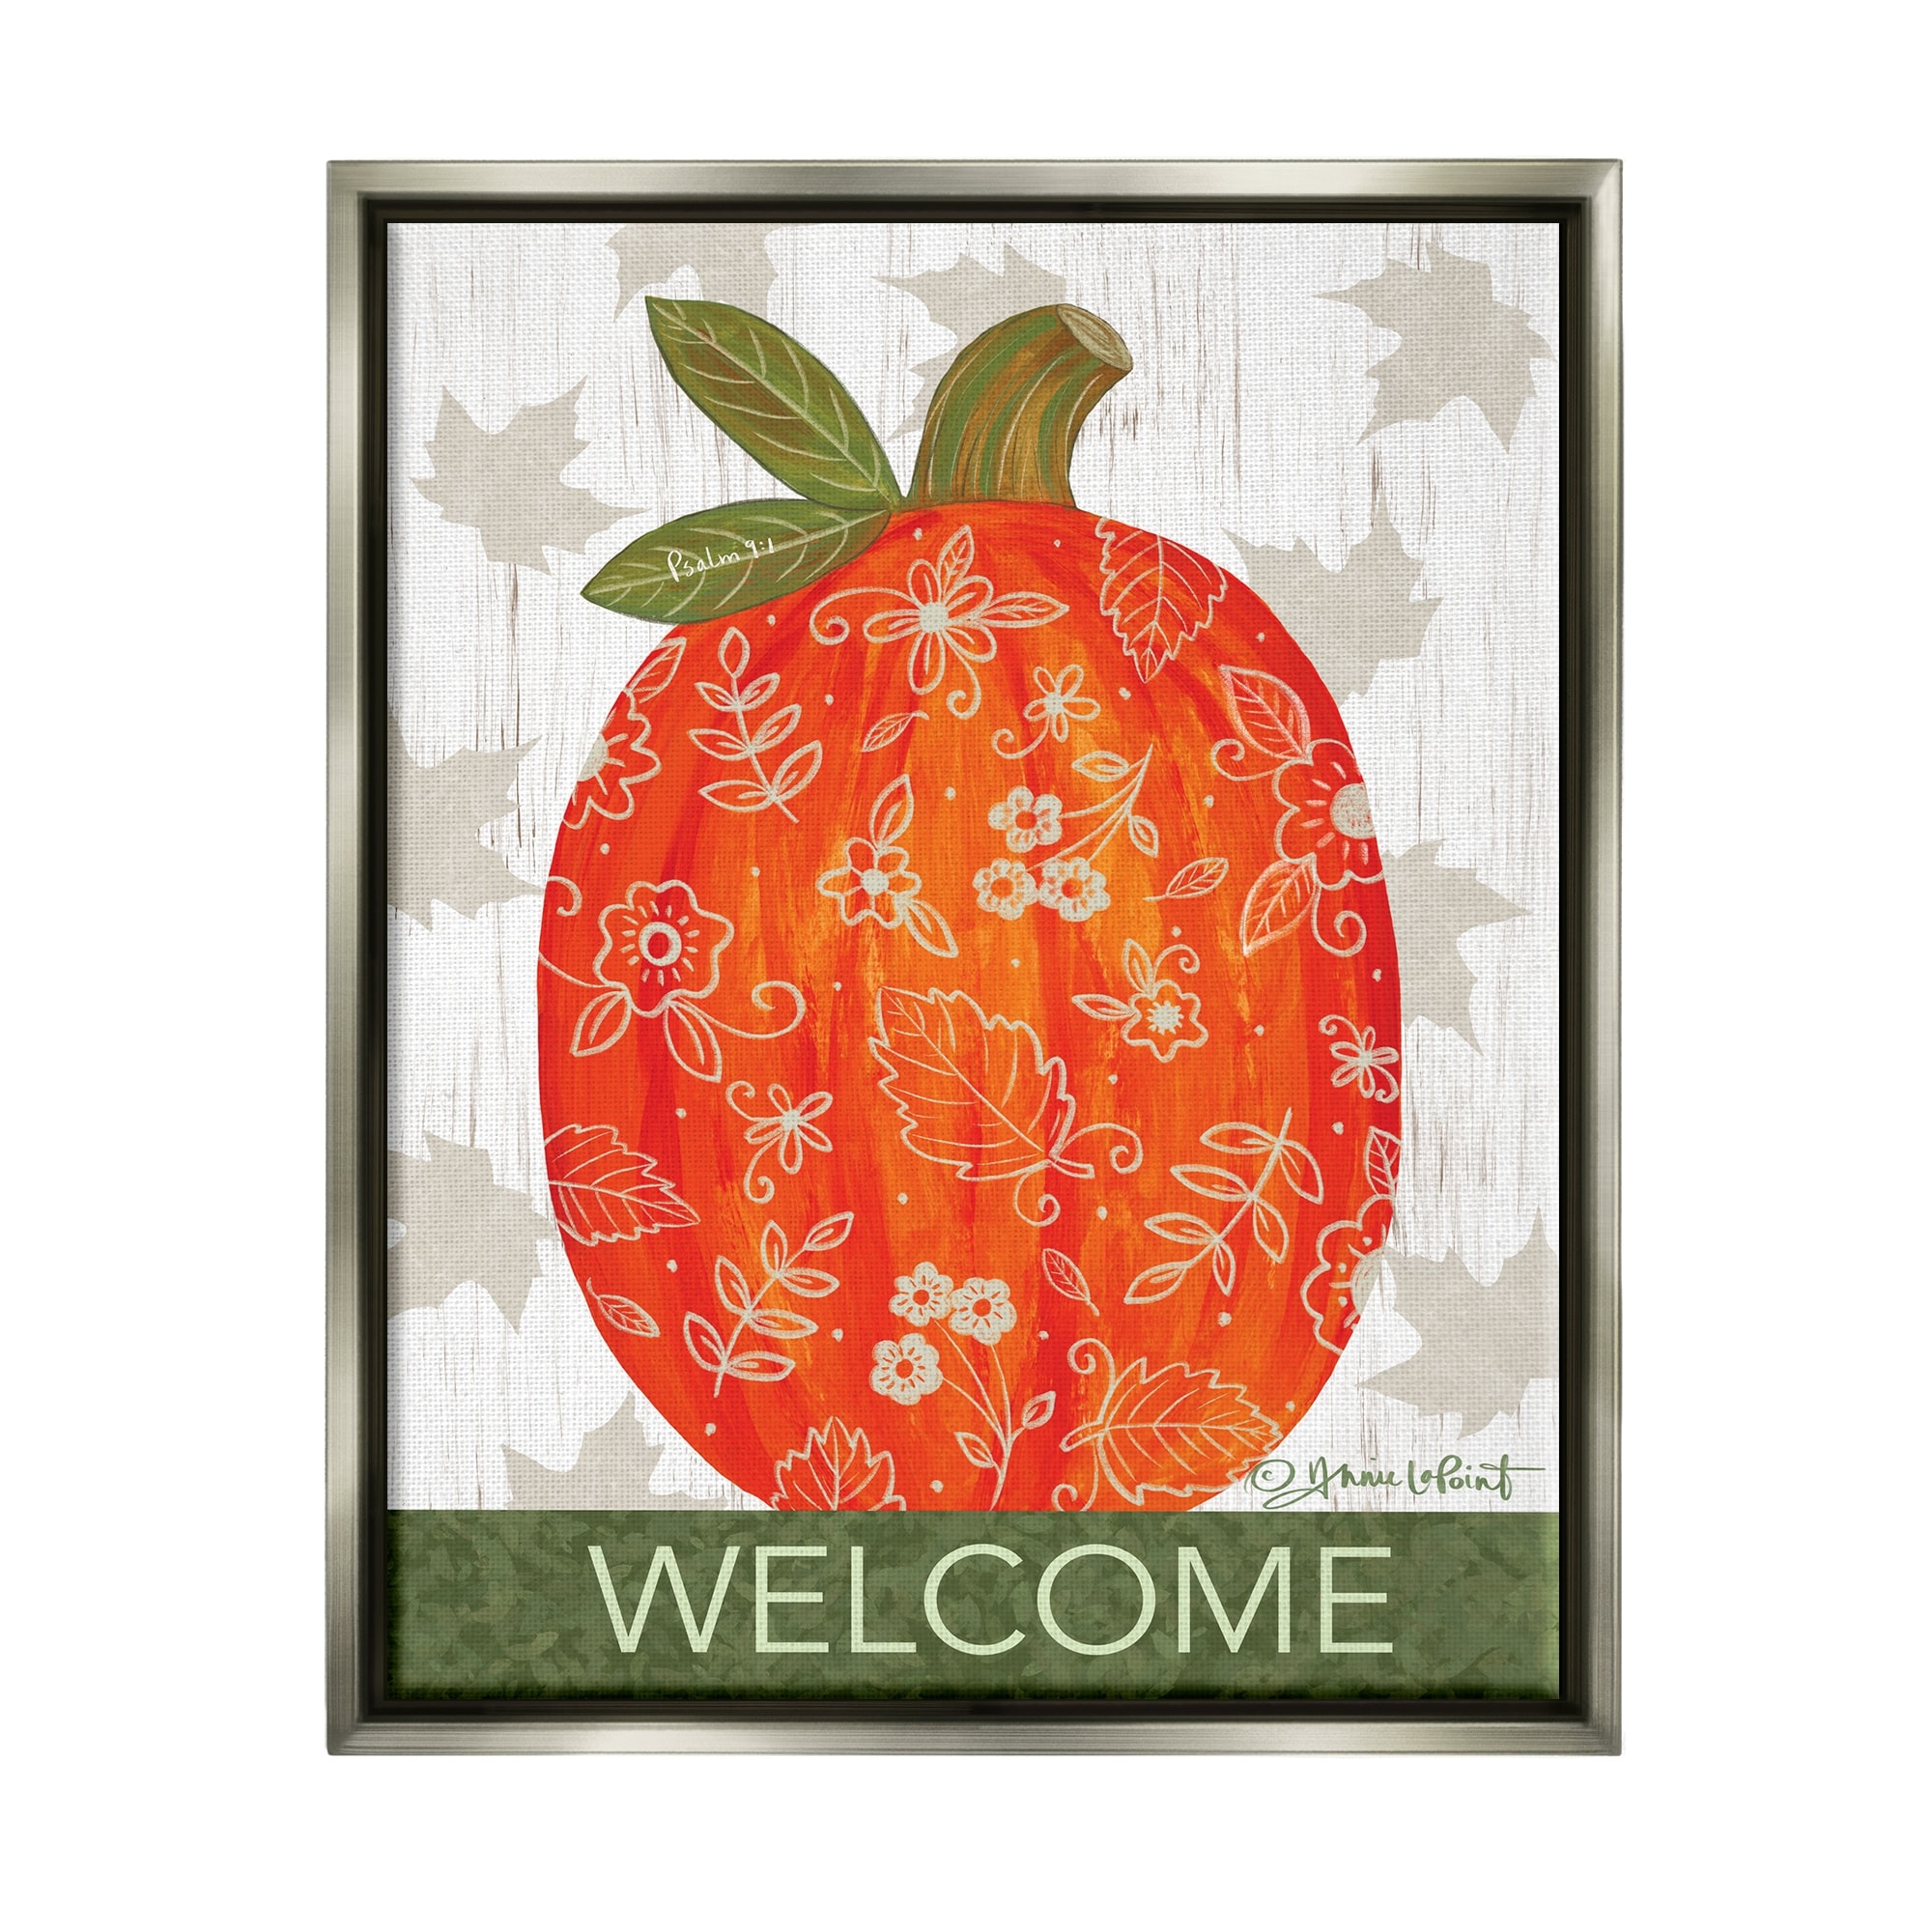 https://ak1.ostkcdn.com/images/products/is/images/direct/f63da4277e35acb7de04e72acd2fac397349240e/Stupell-Industries-Patterned-Autumn-Botanicals-Pumpkin-Welcome-Sign-Floater-Frame%2C-Design-by-Annie-LaPoint.jpg